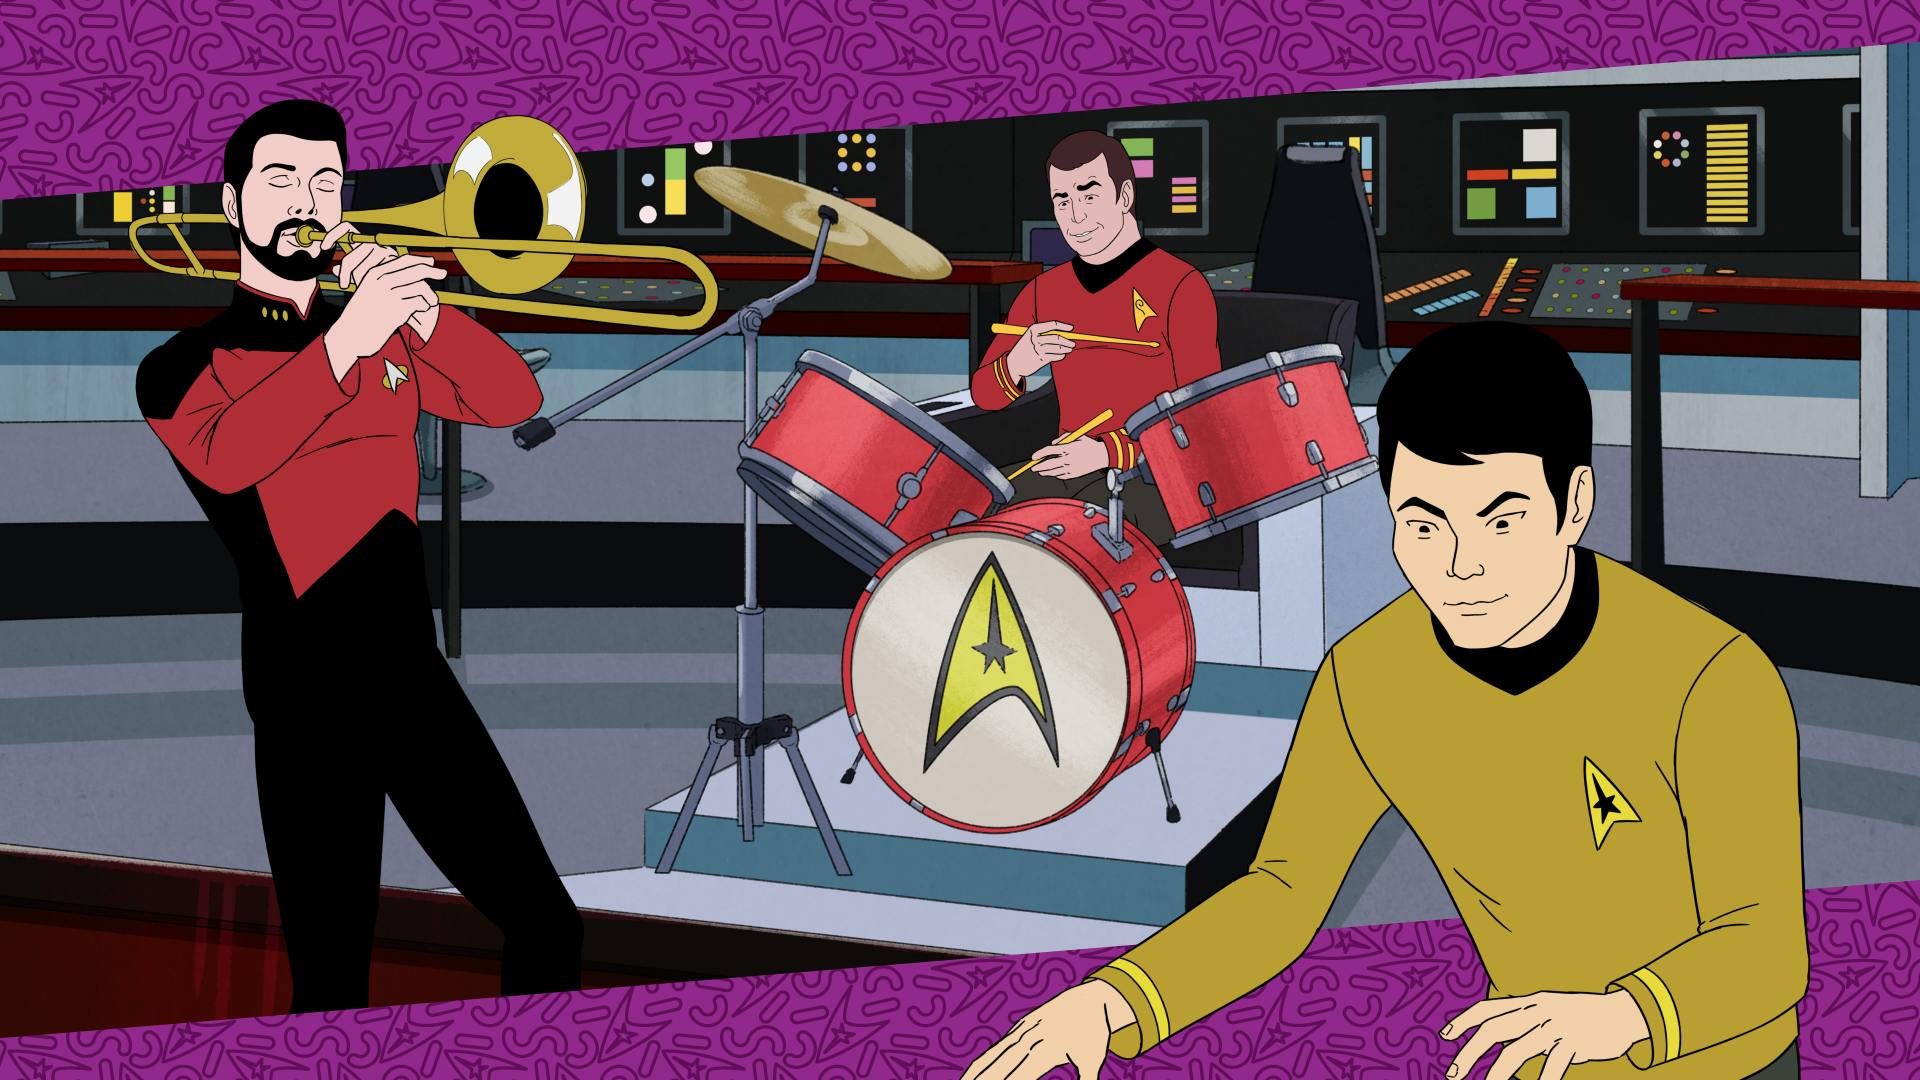 Star Trek: The Animated Series is returning with new shorts featuring  Riker, Quark, and Saru